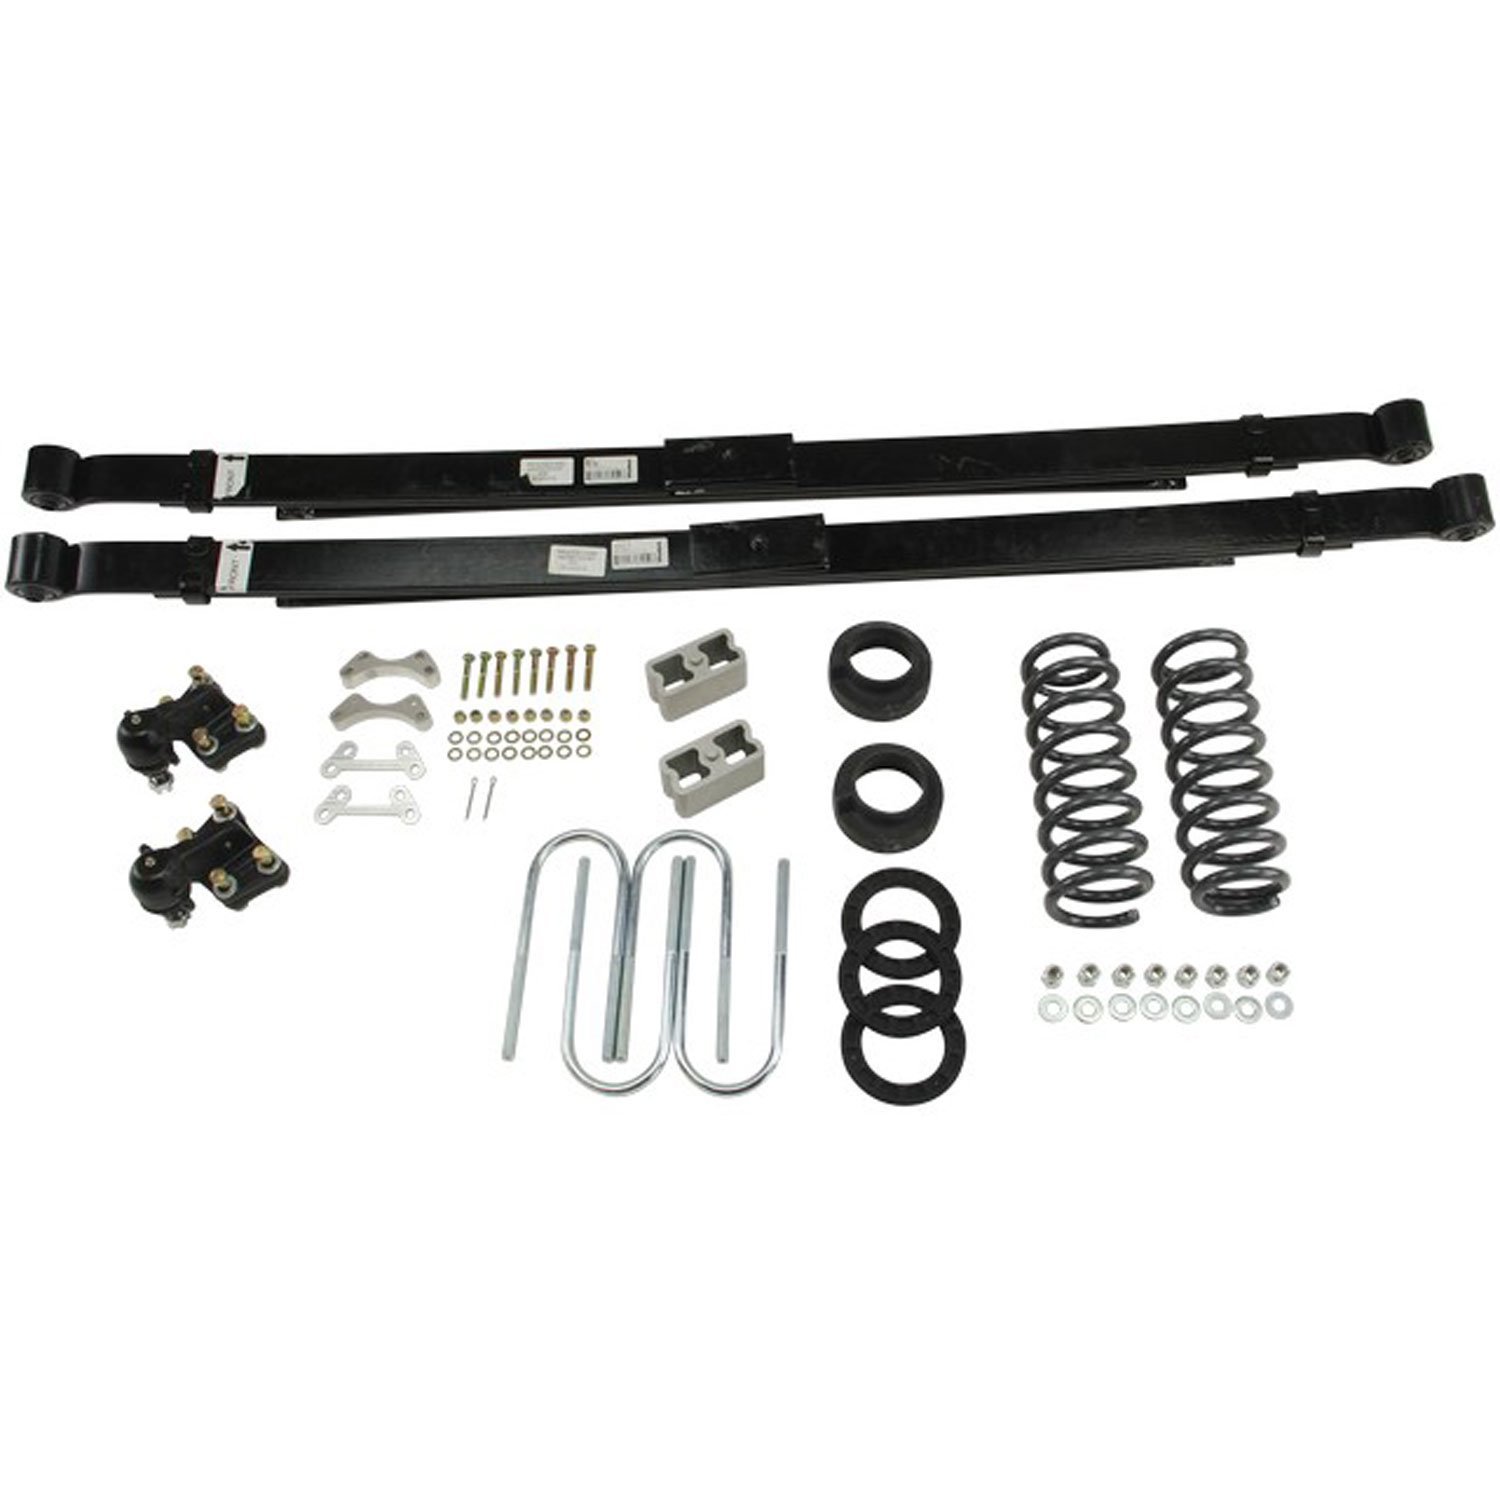 Complete Lowering Kit for 2004-2012 Chevy Colorado/GMC Canyon